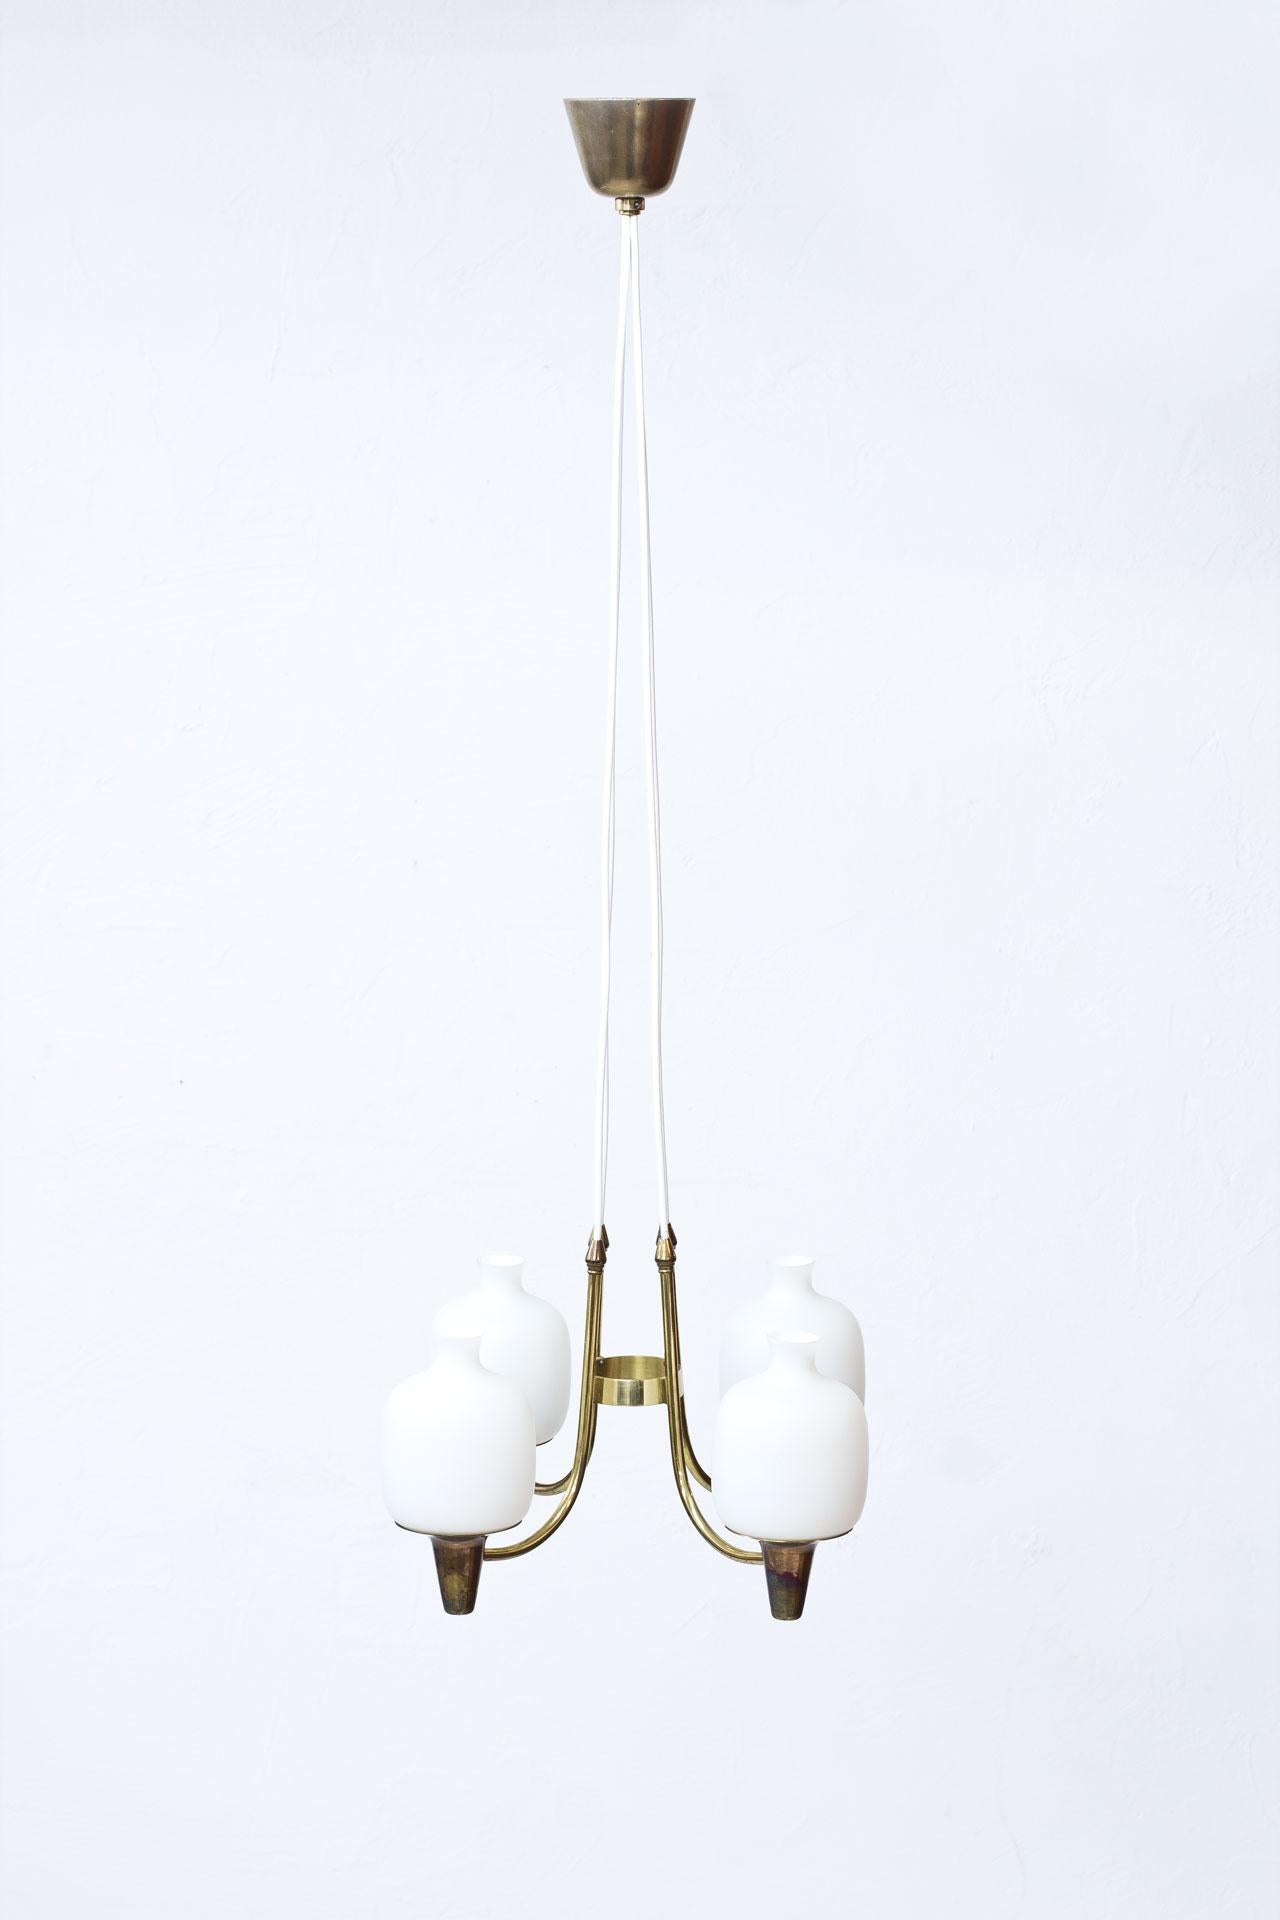 Ceiling lamp most likely manufactured in Sweden during the 1950s. Opaline glass diffusers with brass fittings. Rewired.